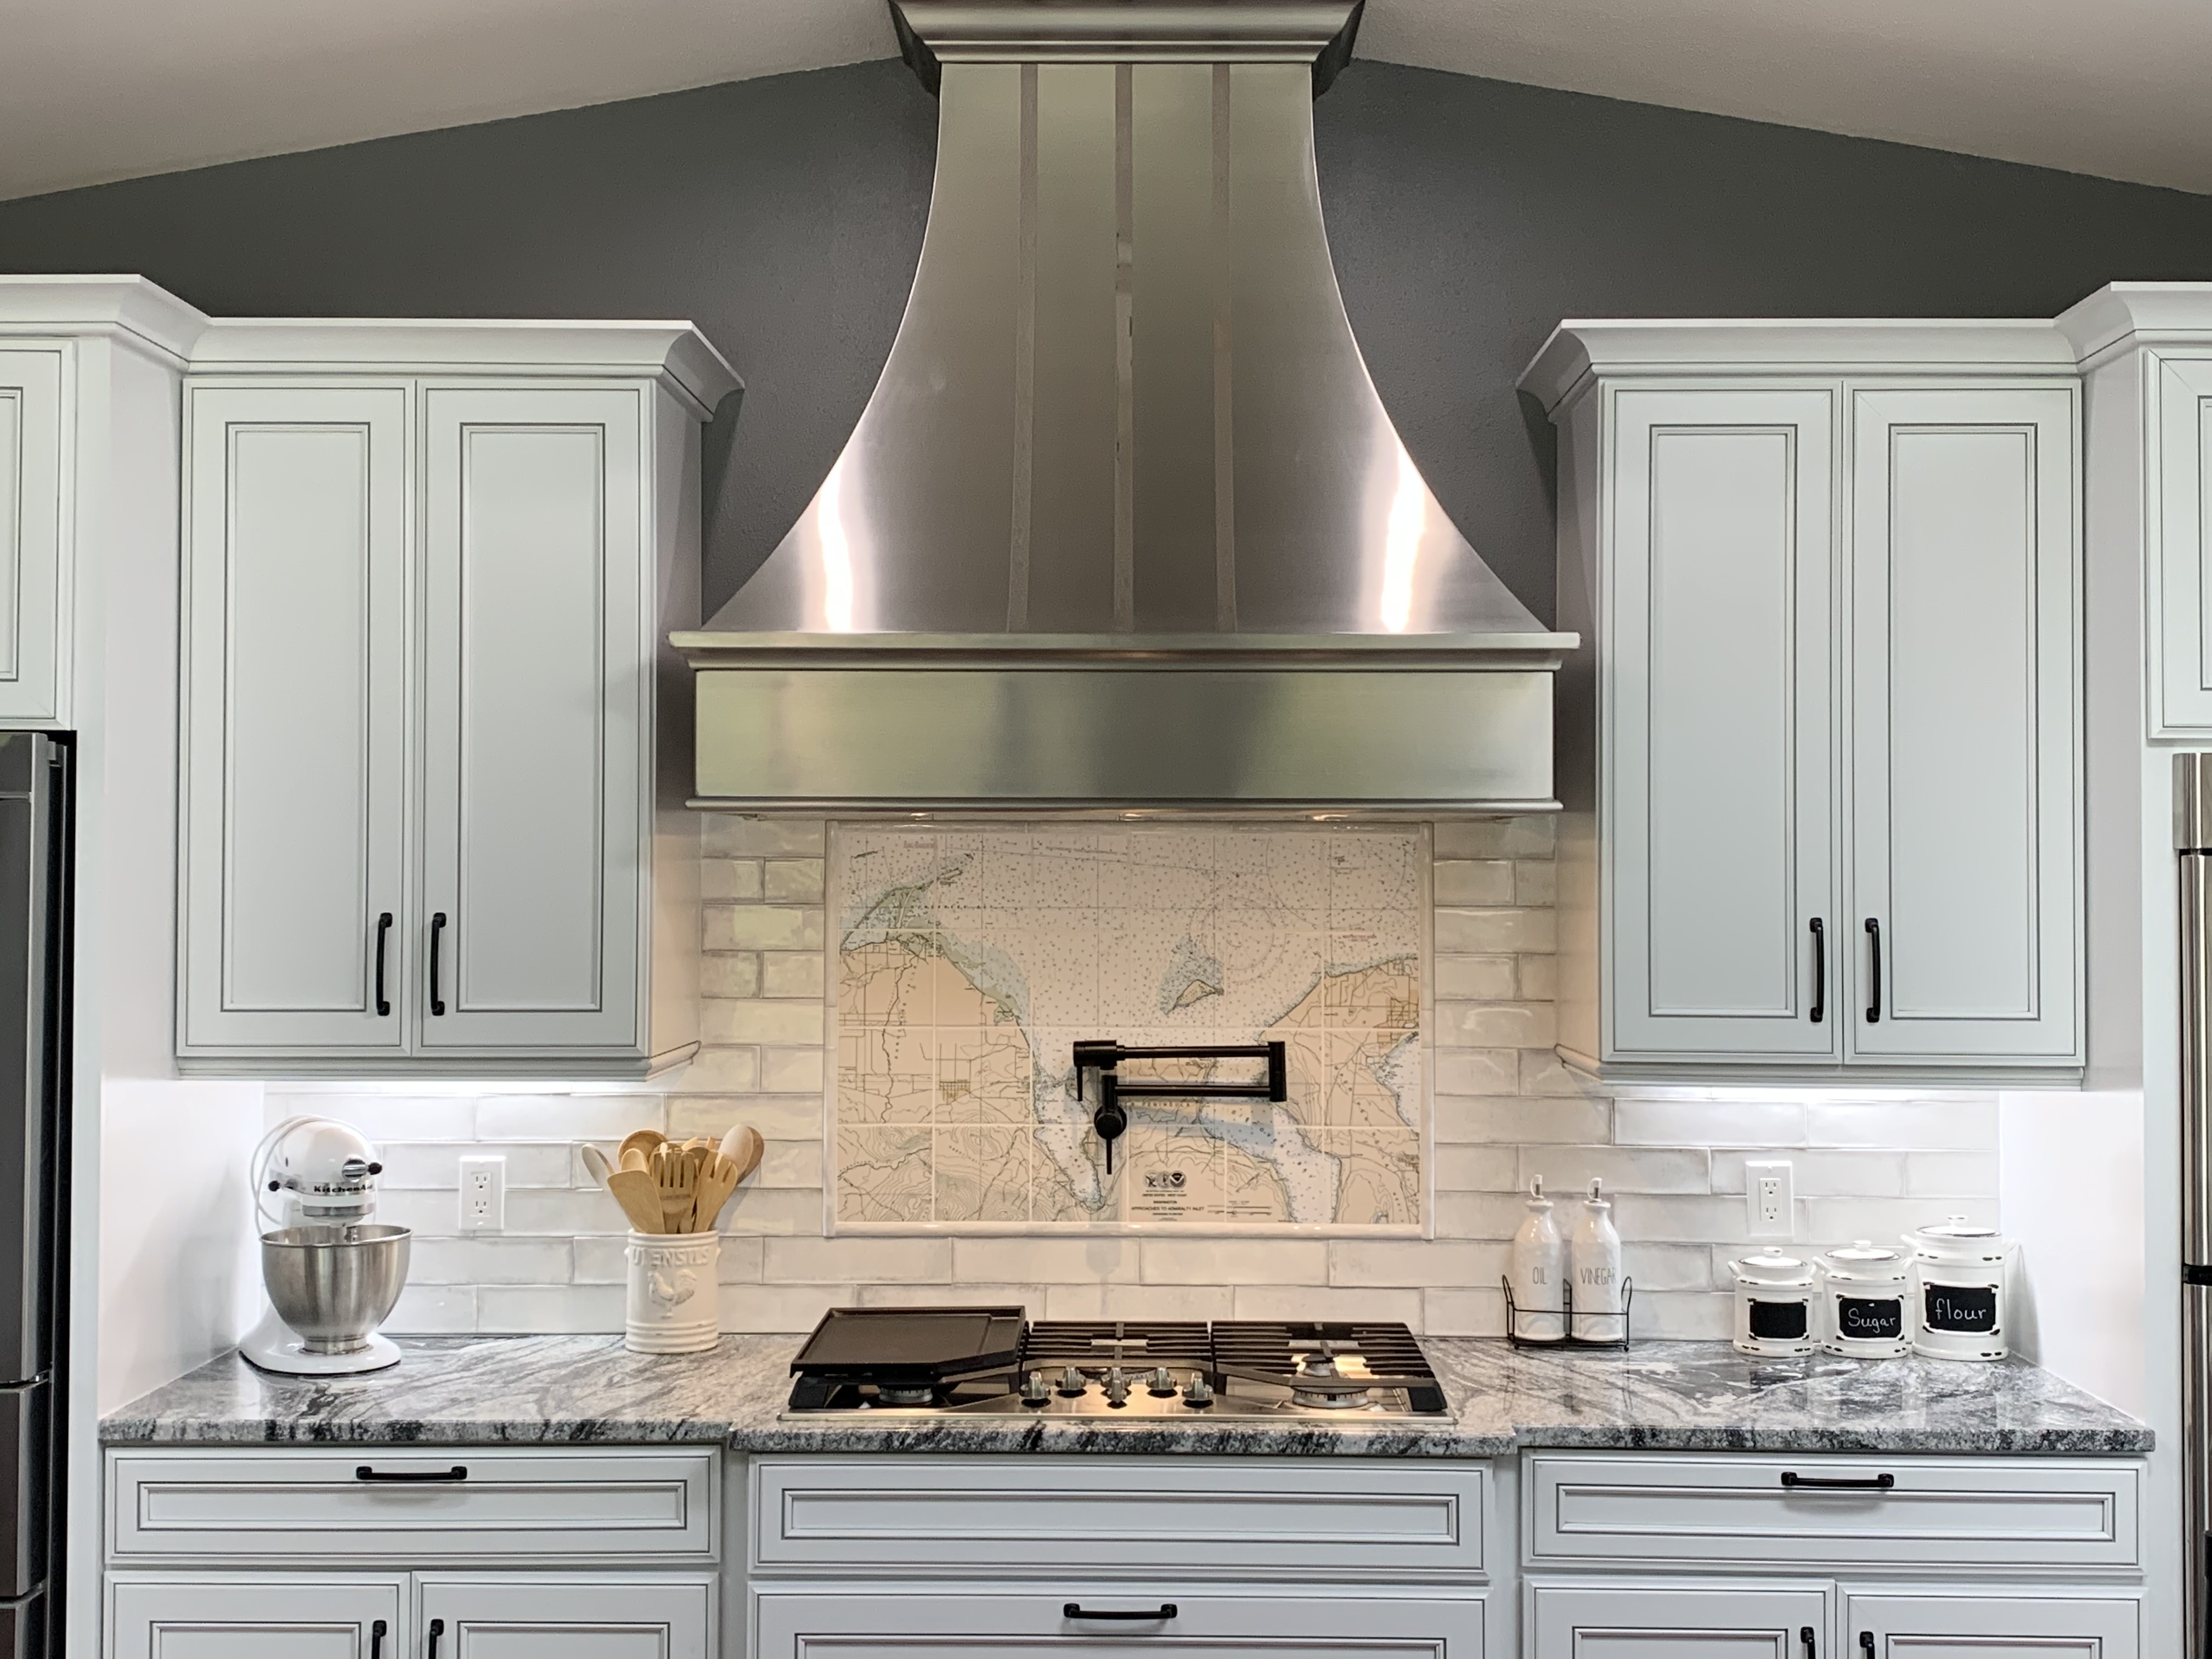 "Detroit" Stainless Steel Hood with Mirrored Straps